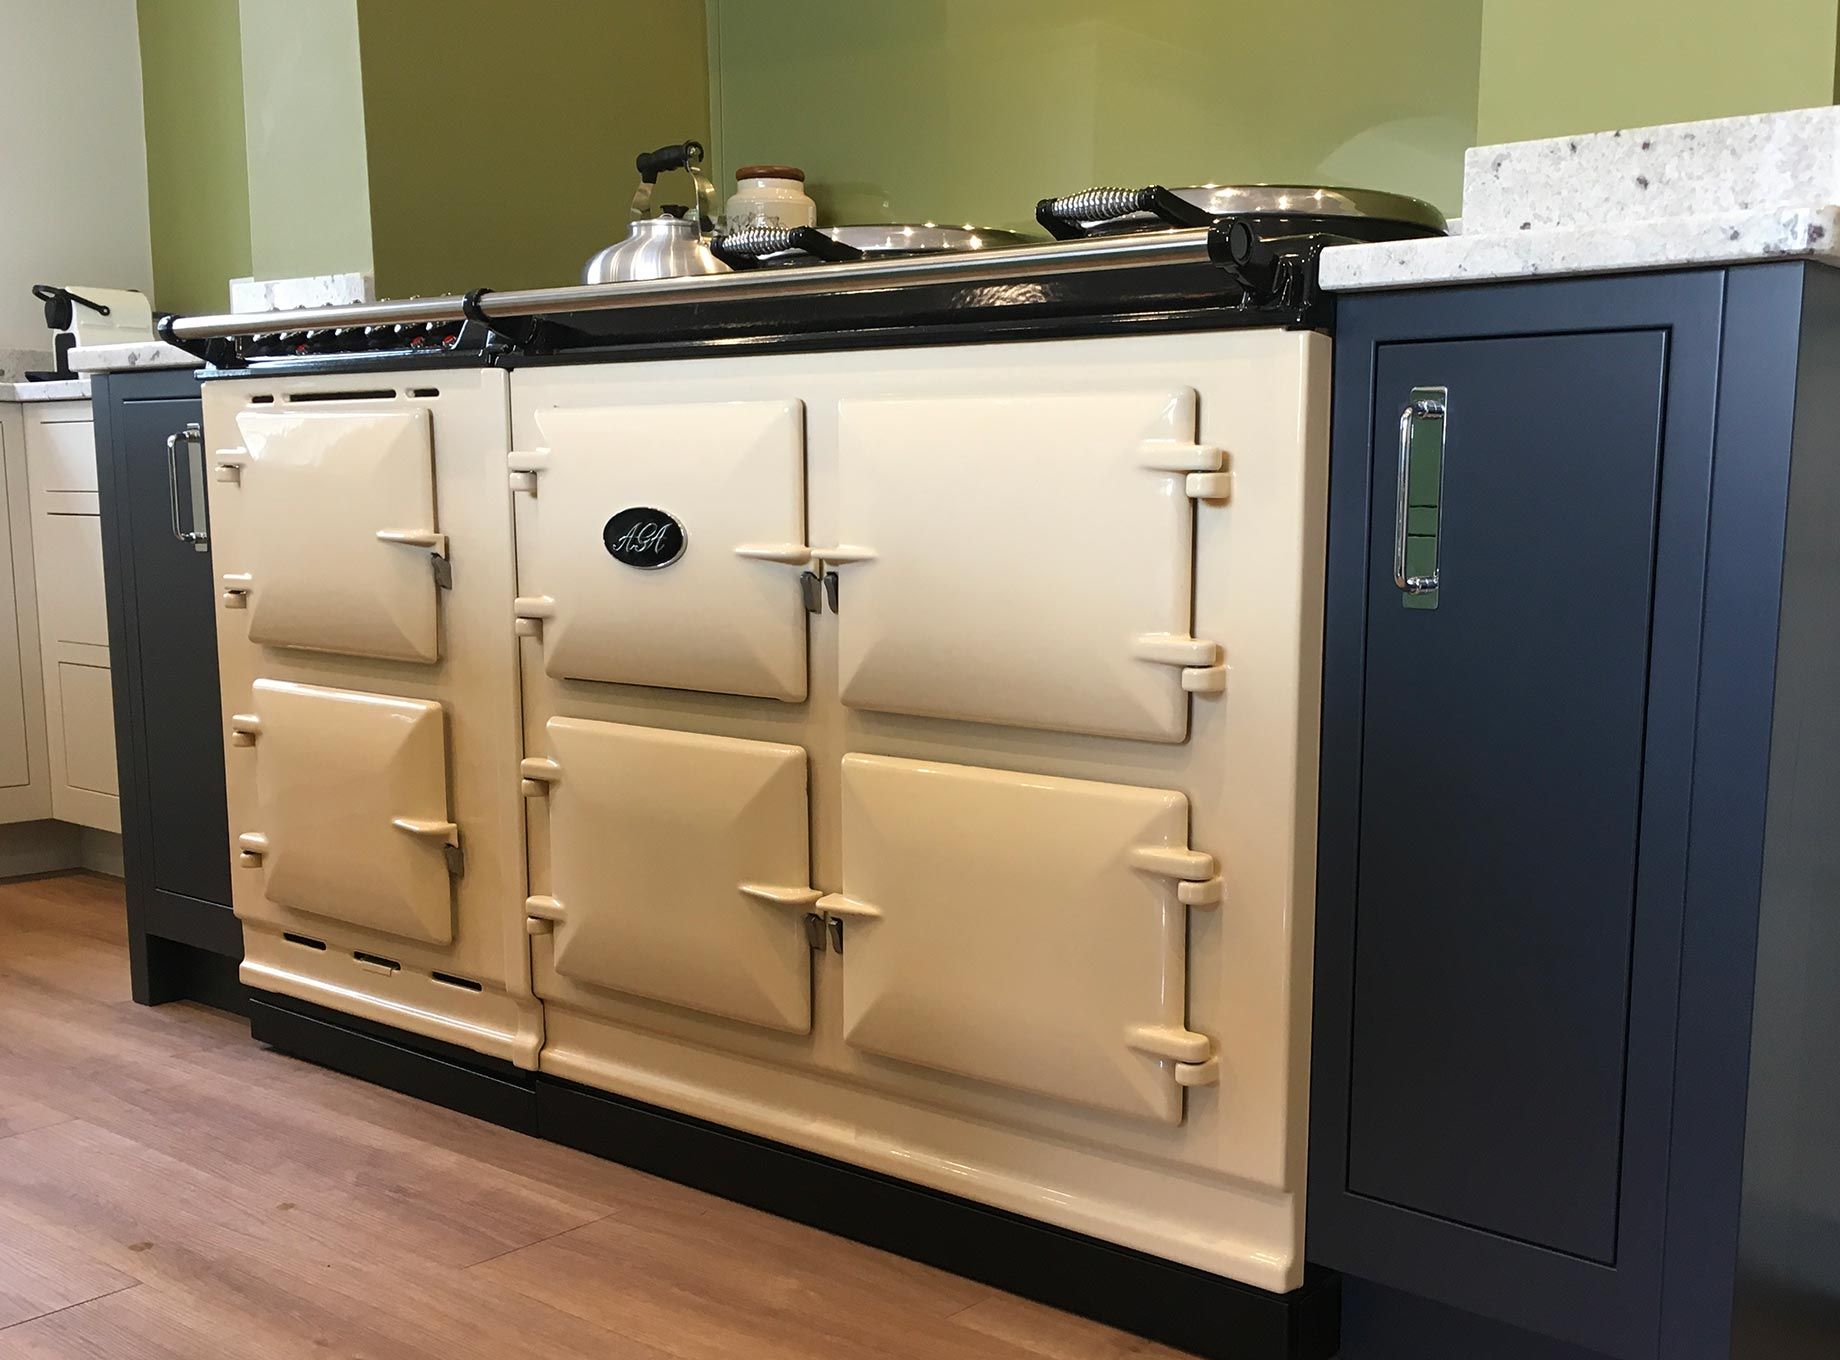 Reconditioned Aga Cooker by Leger Kitchens in York